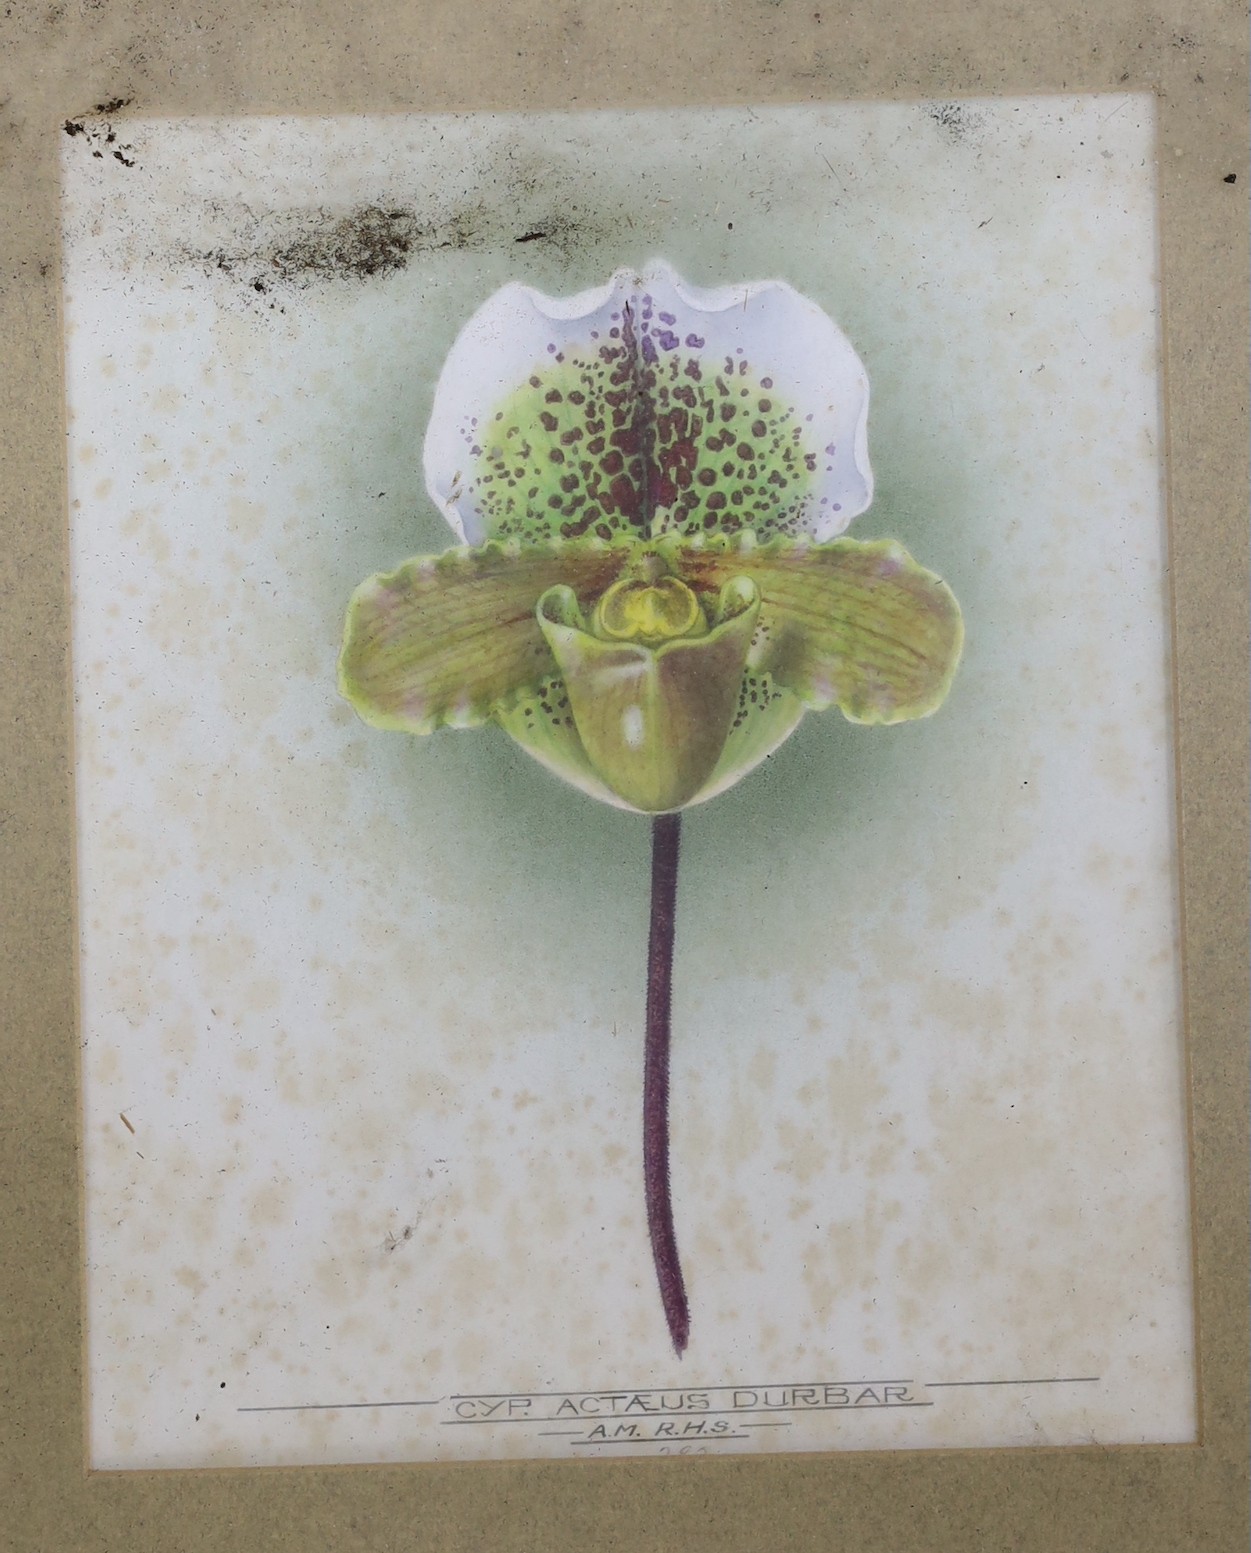 Two early 20th century watercolour studies of slipper orchids, 'Cyp. John Hartley and Cyp. Actaus Durbar', one dated '17, 25 x 20cm